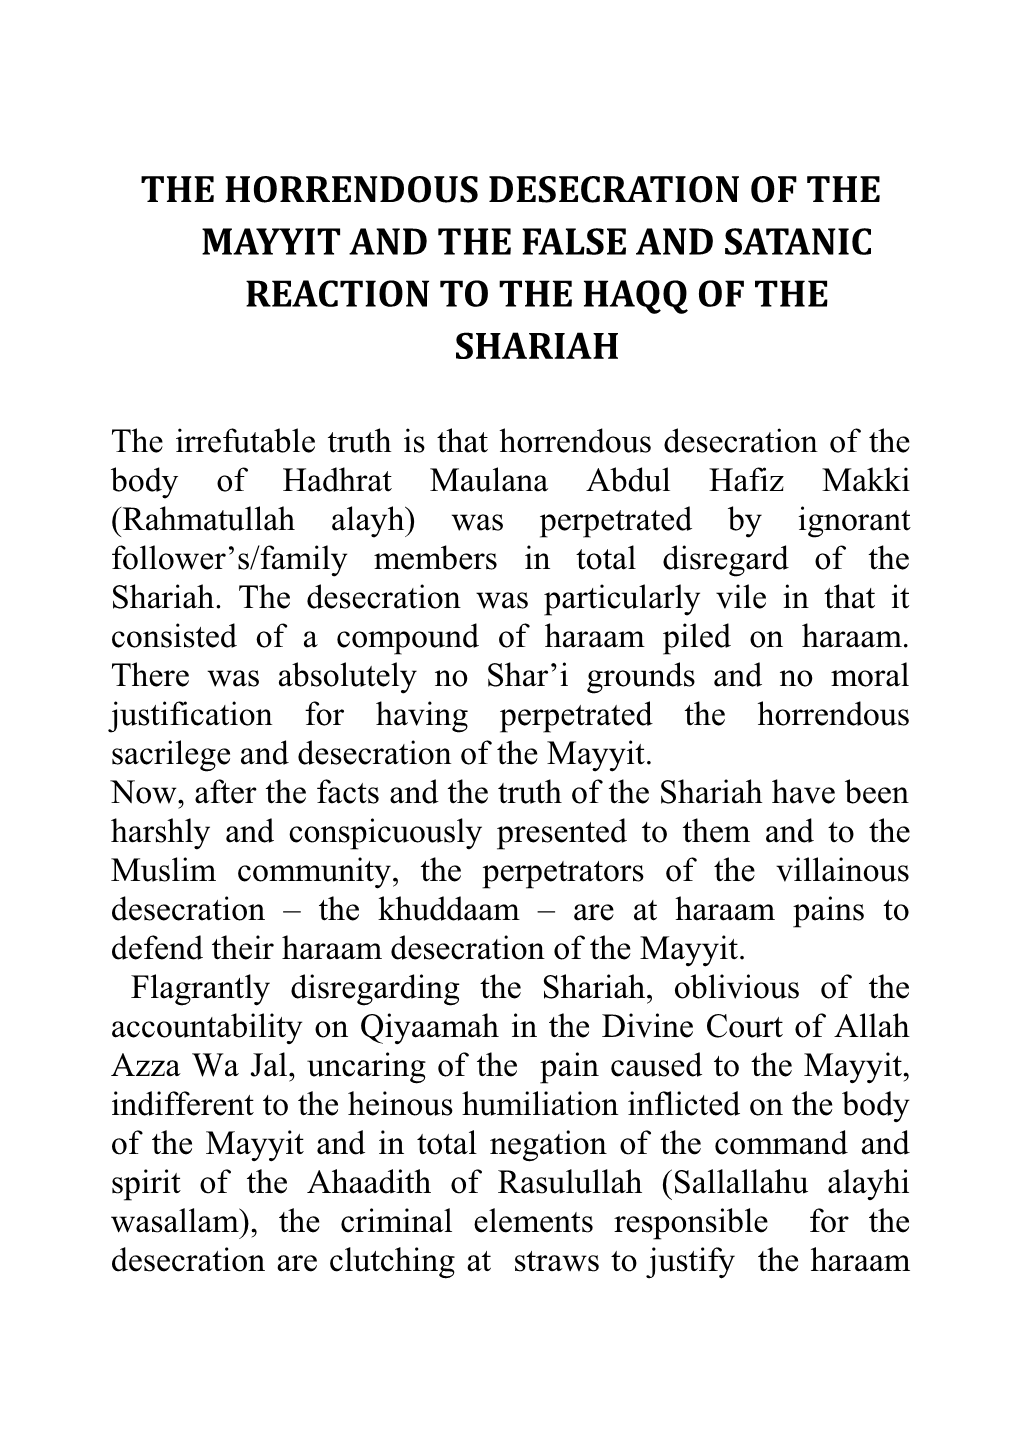 The Horrendous Desecration of the Mayyit and the False and Satanic Reaction to the Haqq